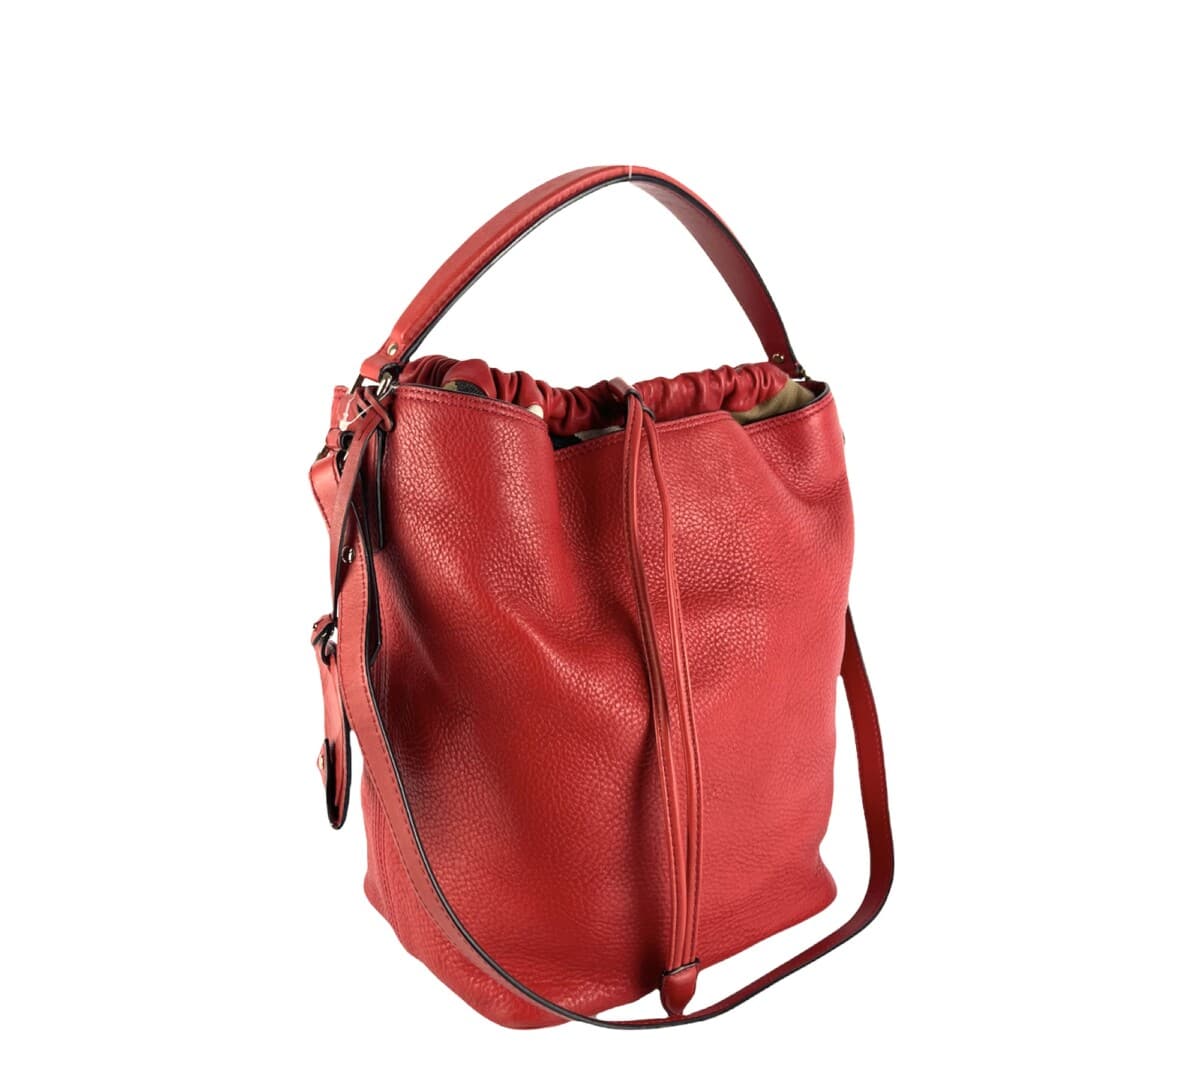 Soft Red Leather Purse Outlet - www.edoc.com.vn 1693493852